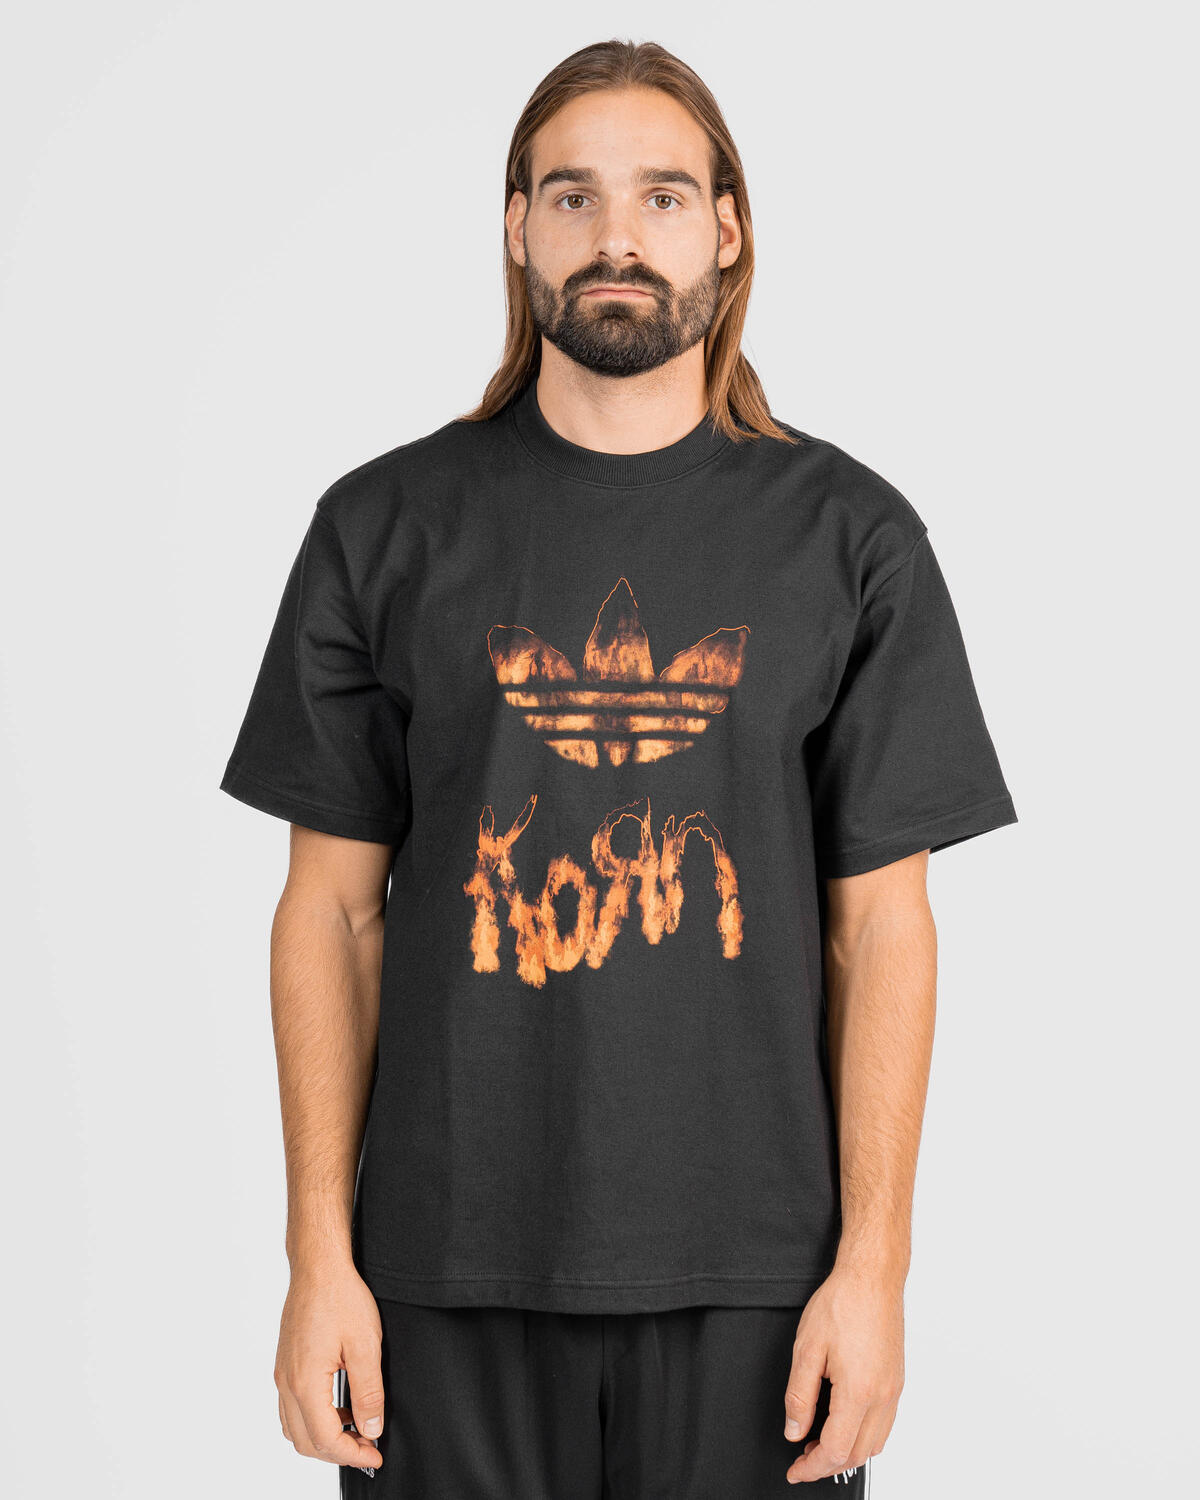 adidas x Korn T-Shirt (Black / Red) IN9098 - Allike Store